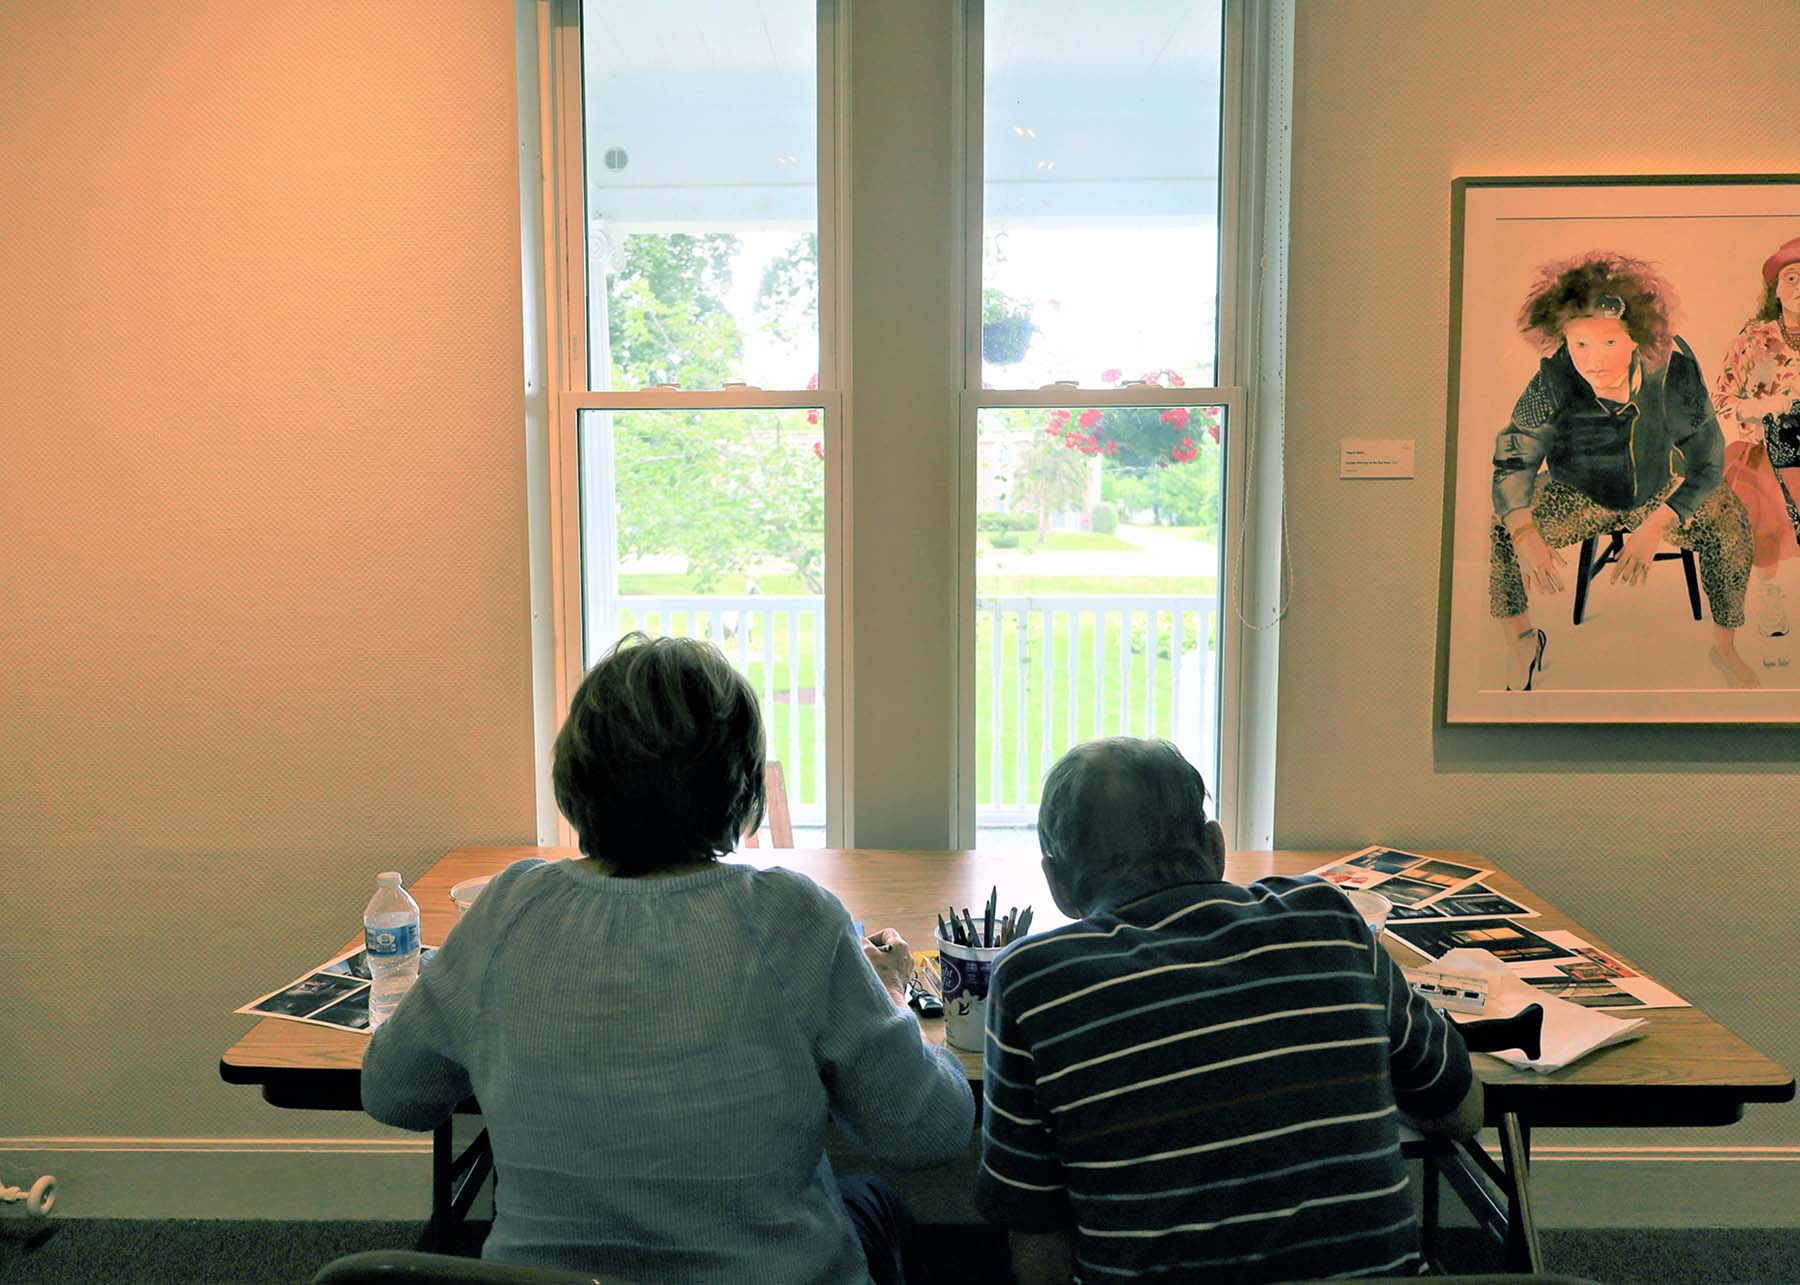 A couple sitting at a table in front of a window inside an art museum gallery, facing away from the viewer. Both people are working on an art project. A garden can be seen from the window.